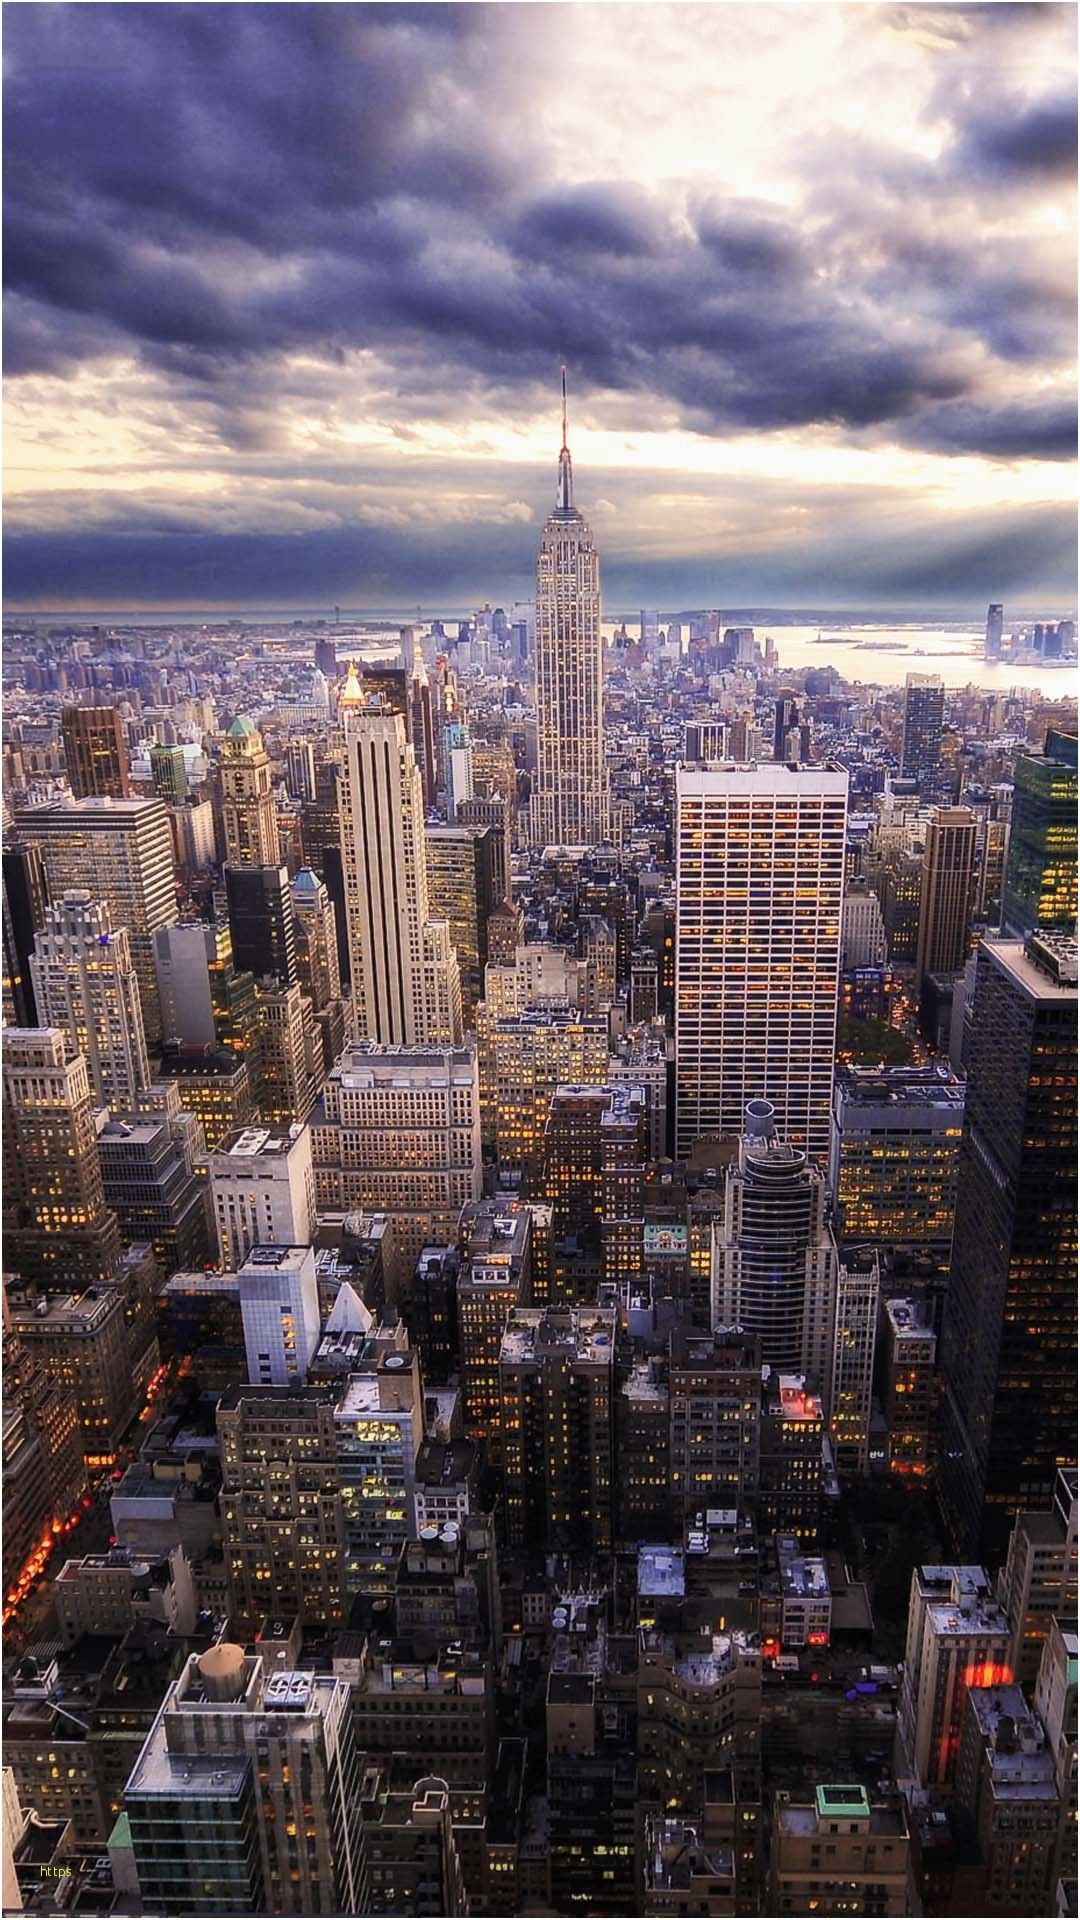 IPhone wallpaper New York City with high-resolution 1080x1920 pixel. You can use this wallpaper for your iPhone 5, 6, 7, 8, X, XS, XR backgrounds, Mobile Screensaver, or iPad Lock Screen - Skyline